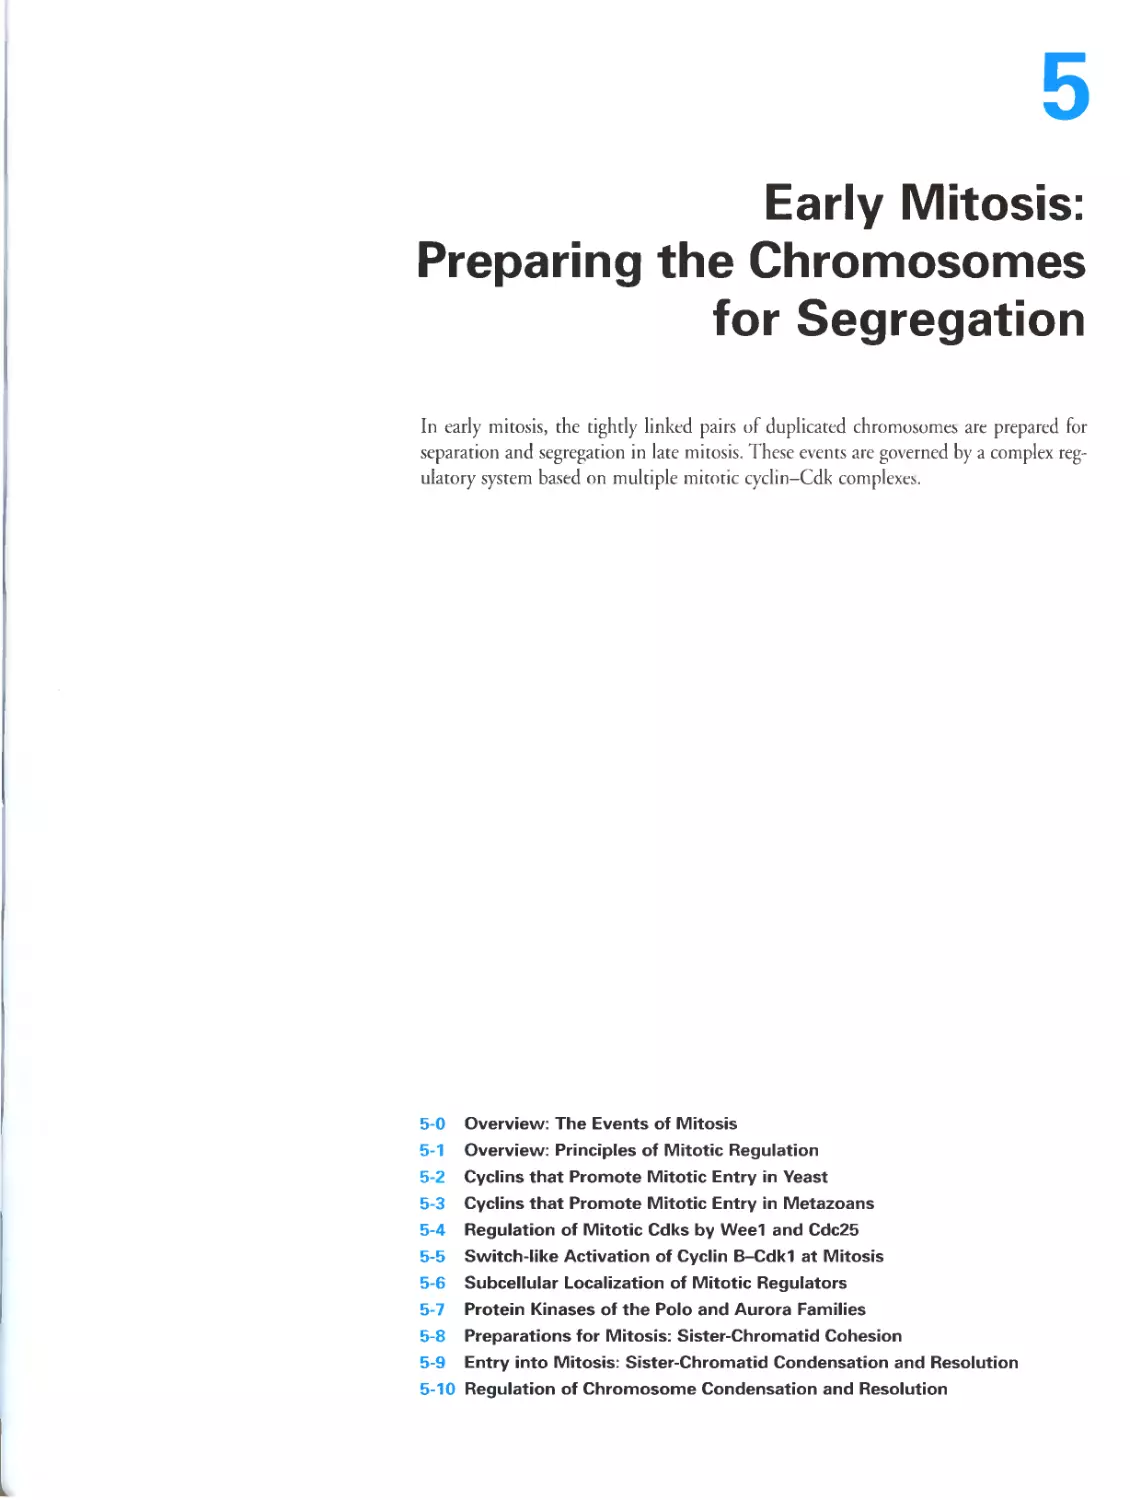 Chapter 5. Early Mitosis: Preparing the Chromosomes for Segregation